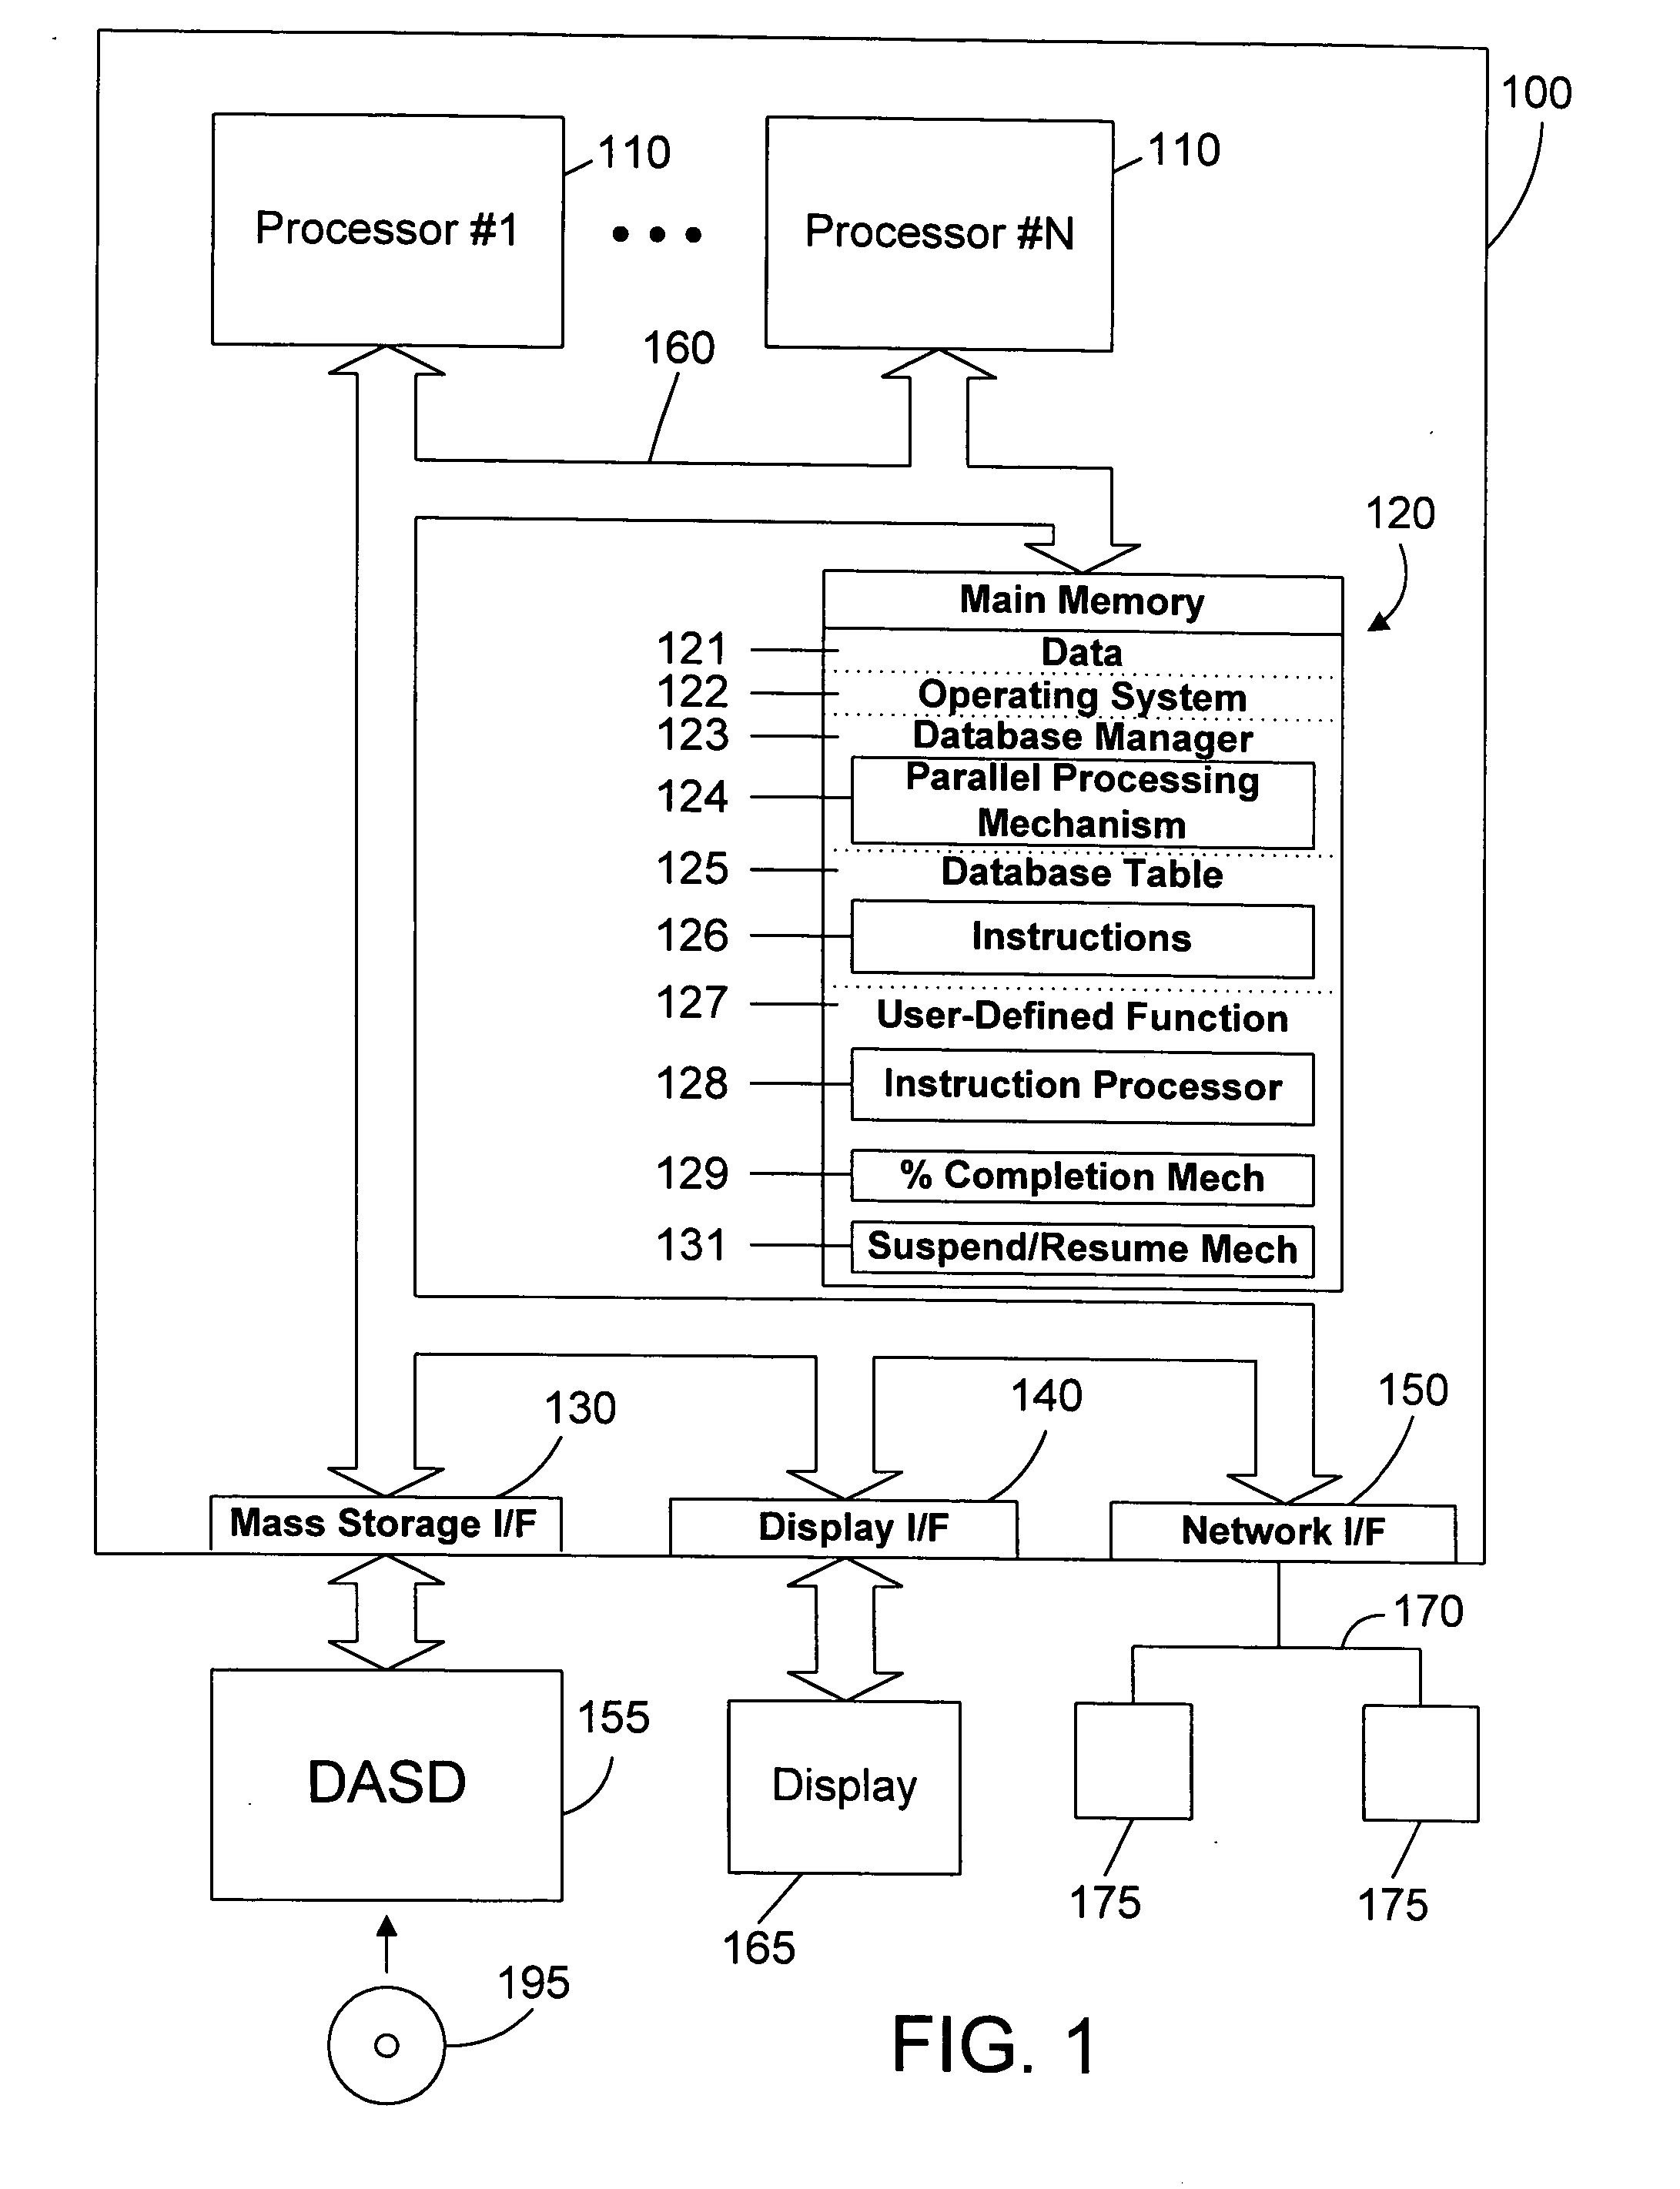 Apparatus and method for enabling parallel processing of a computer program using existing database parallelism